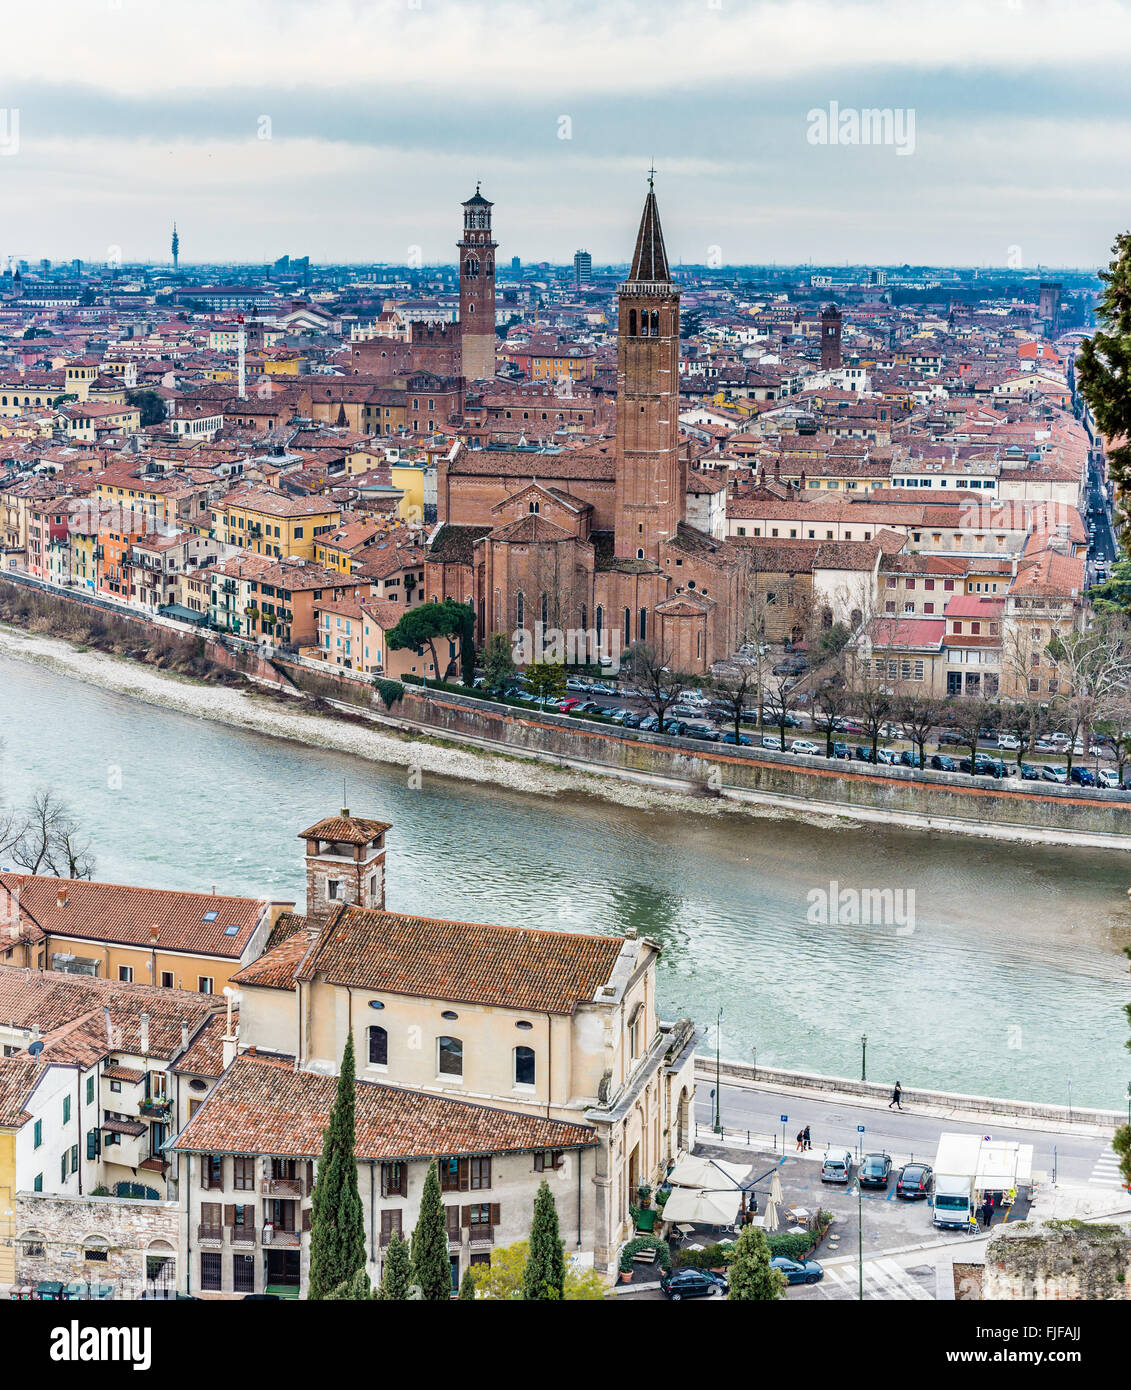 panorama of the Adige River as it passes through the houses and historical buildings of Verona in Italy, known as romantic city of love because Romeo and Juliet by Shakespeare was set here Stock Photo